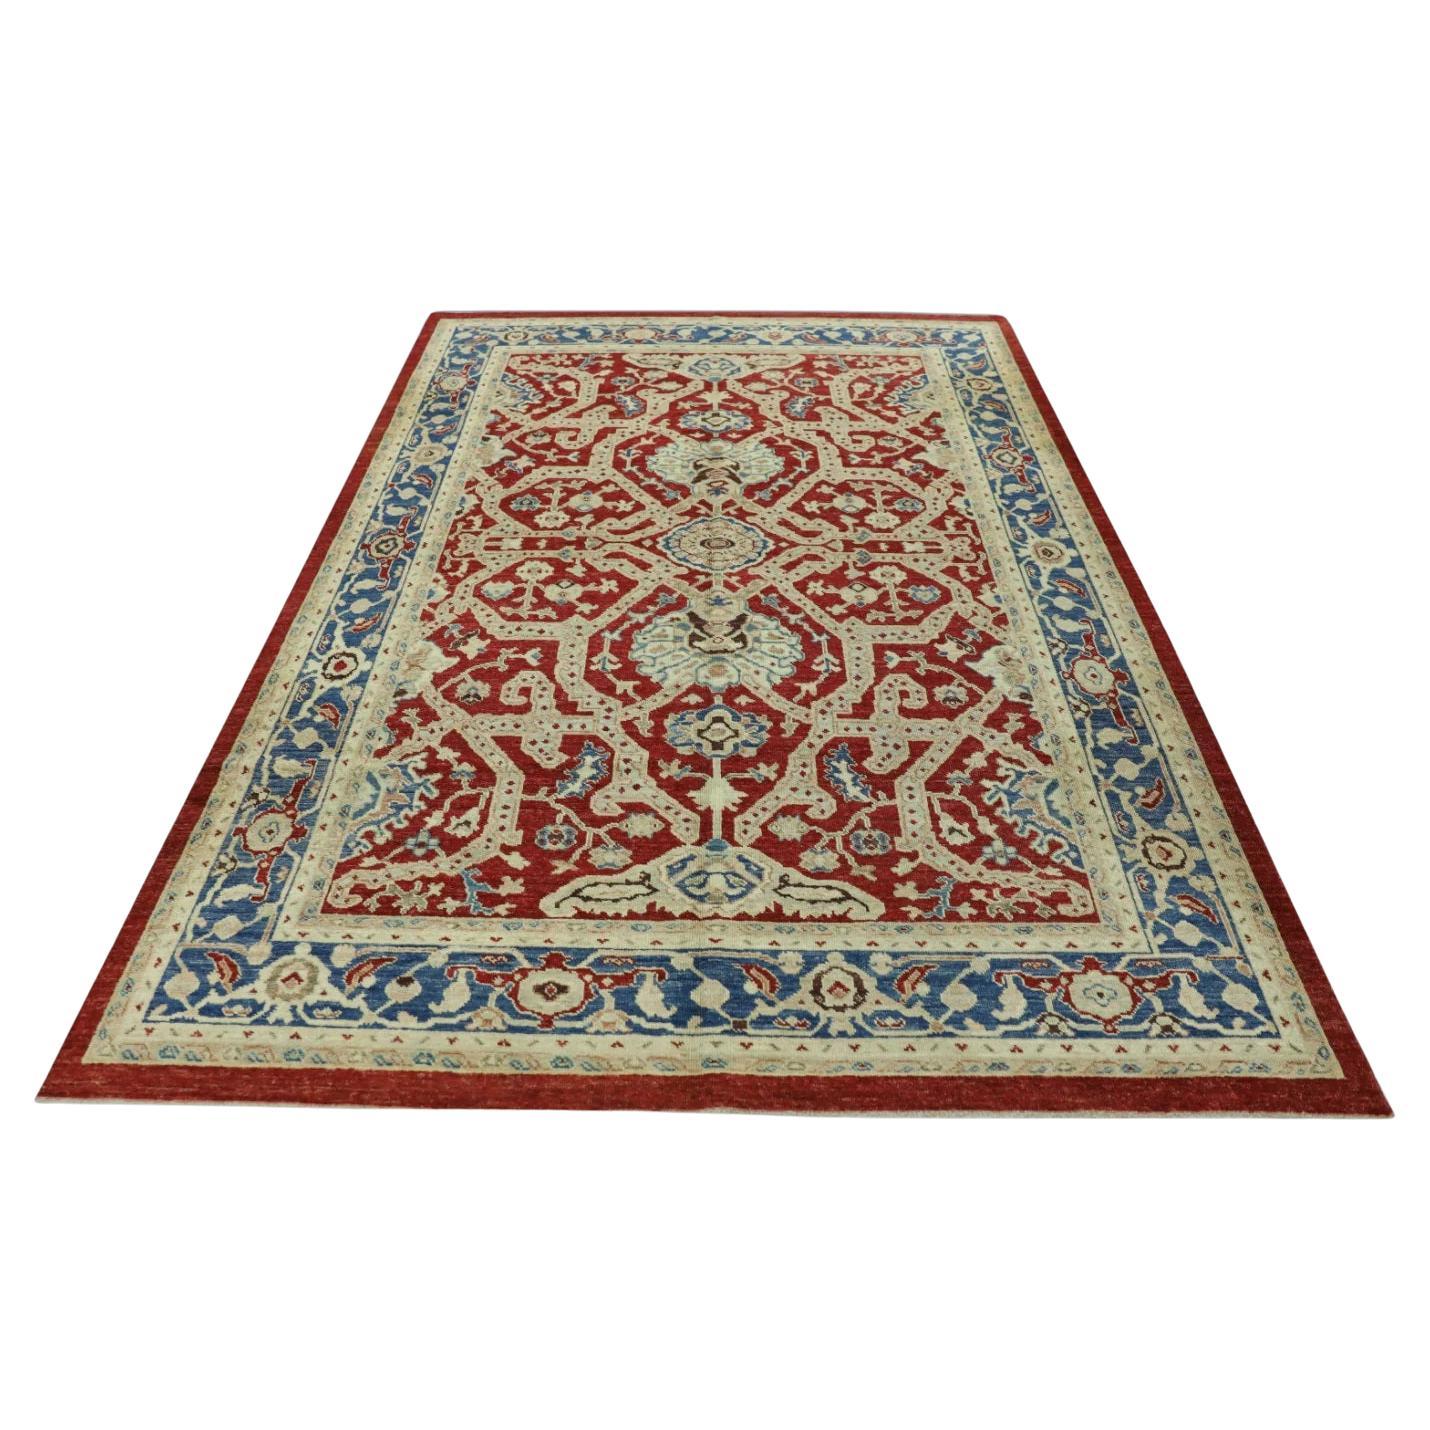 Traditional Red and Blue Turkish Finewoven Wool Oushak Rug 6'1" x 8'10" For Sale